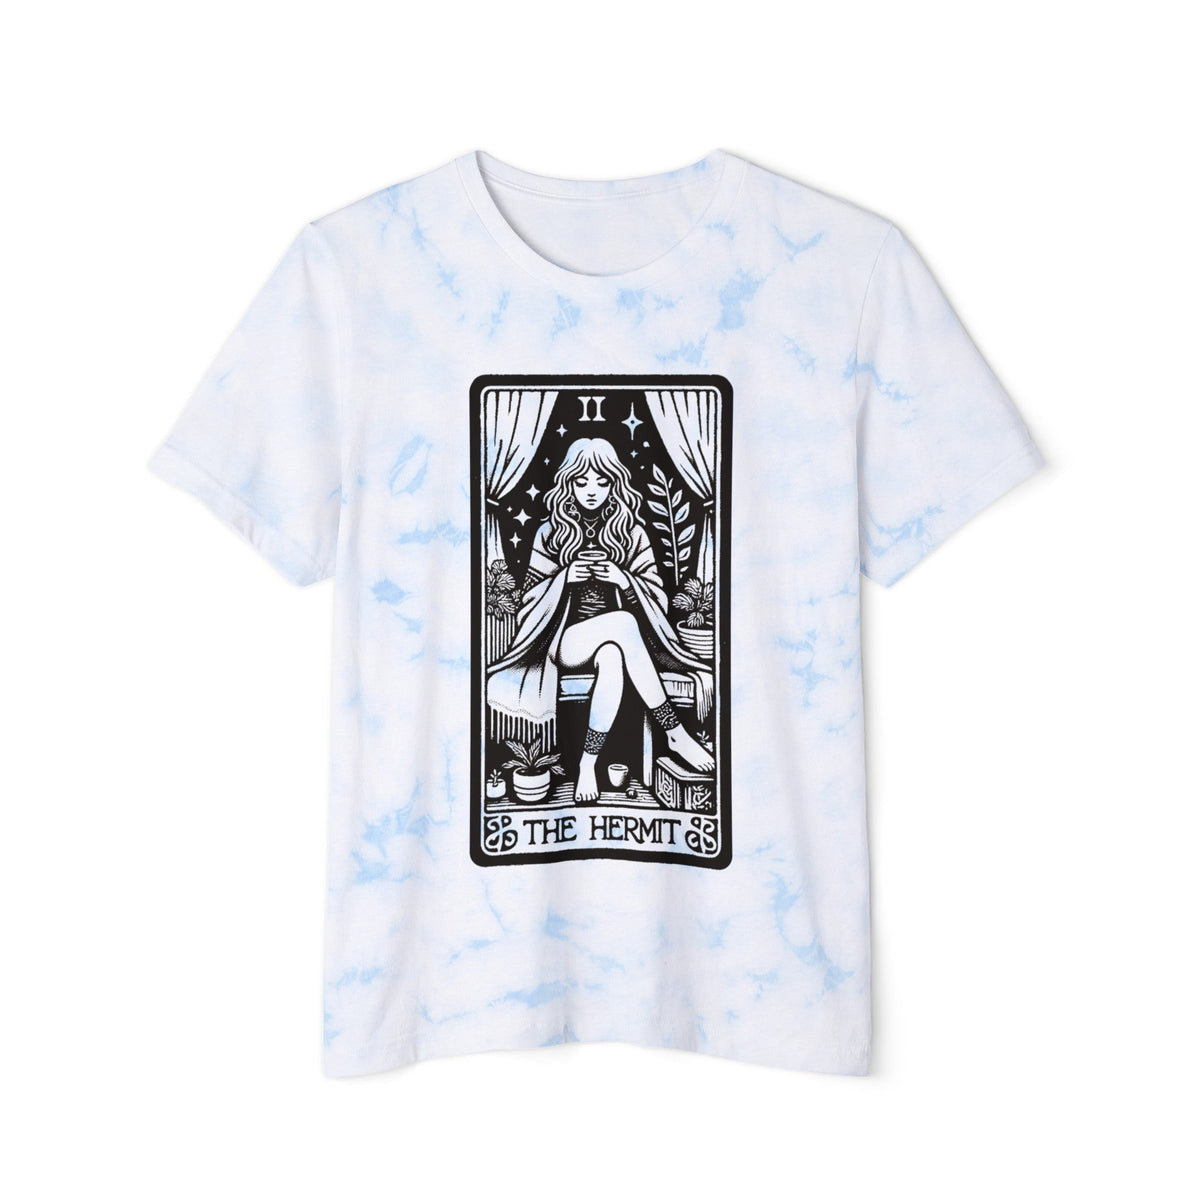 The Hermit Girl Cloud Tie - Dyed T - Shirt - Goth Cloth Co.T - Shirt16738054936390264335